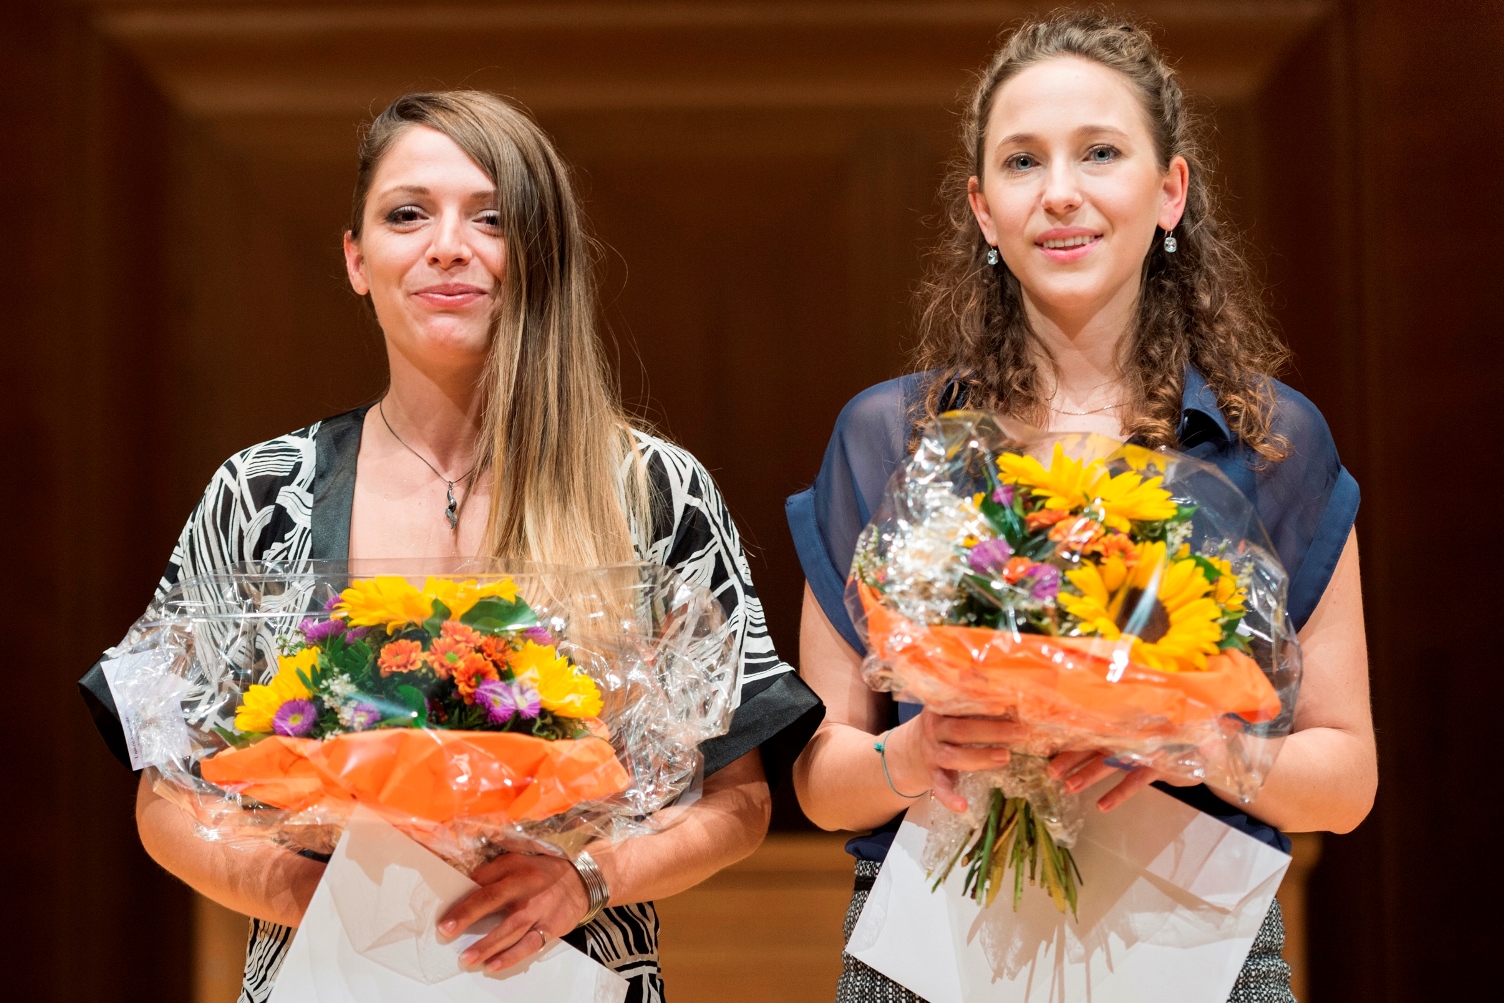 In 2015, the Johann Jacob Rieter prize for the best Bachelor’s thesis in the BA in Applied Languages was awarded to Dzevaire Sulejmani and Claudia Masur.